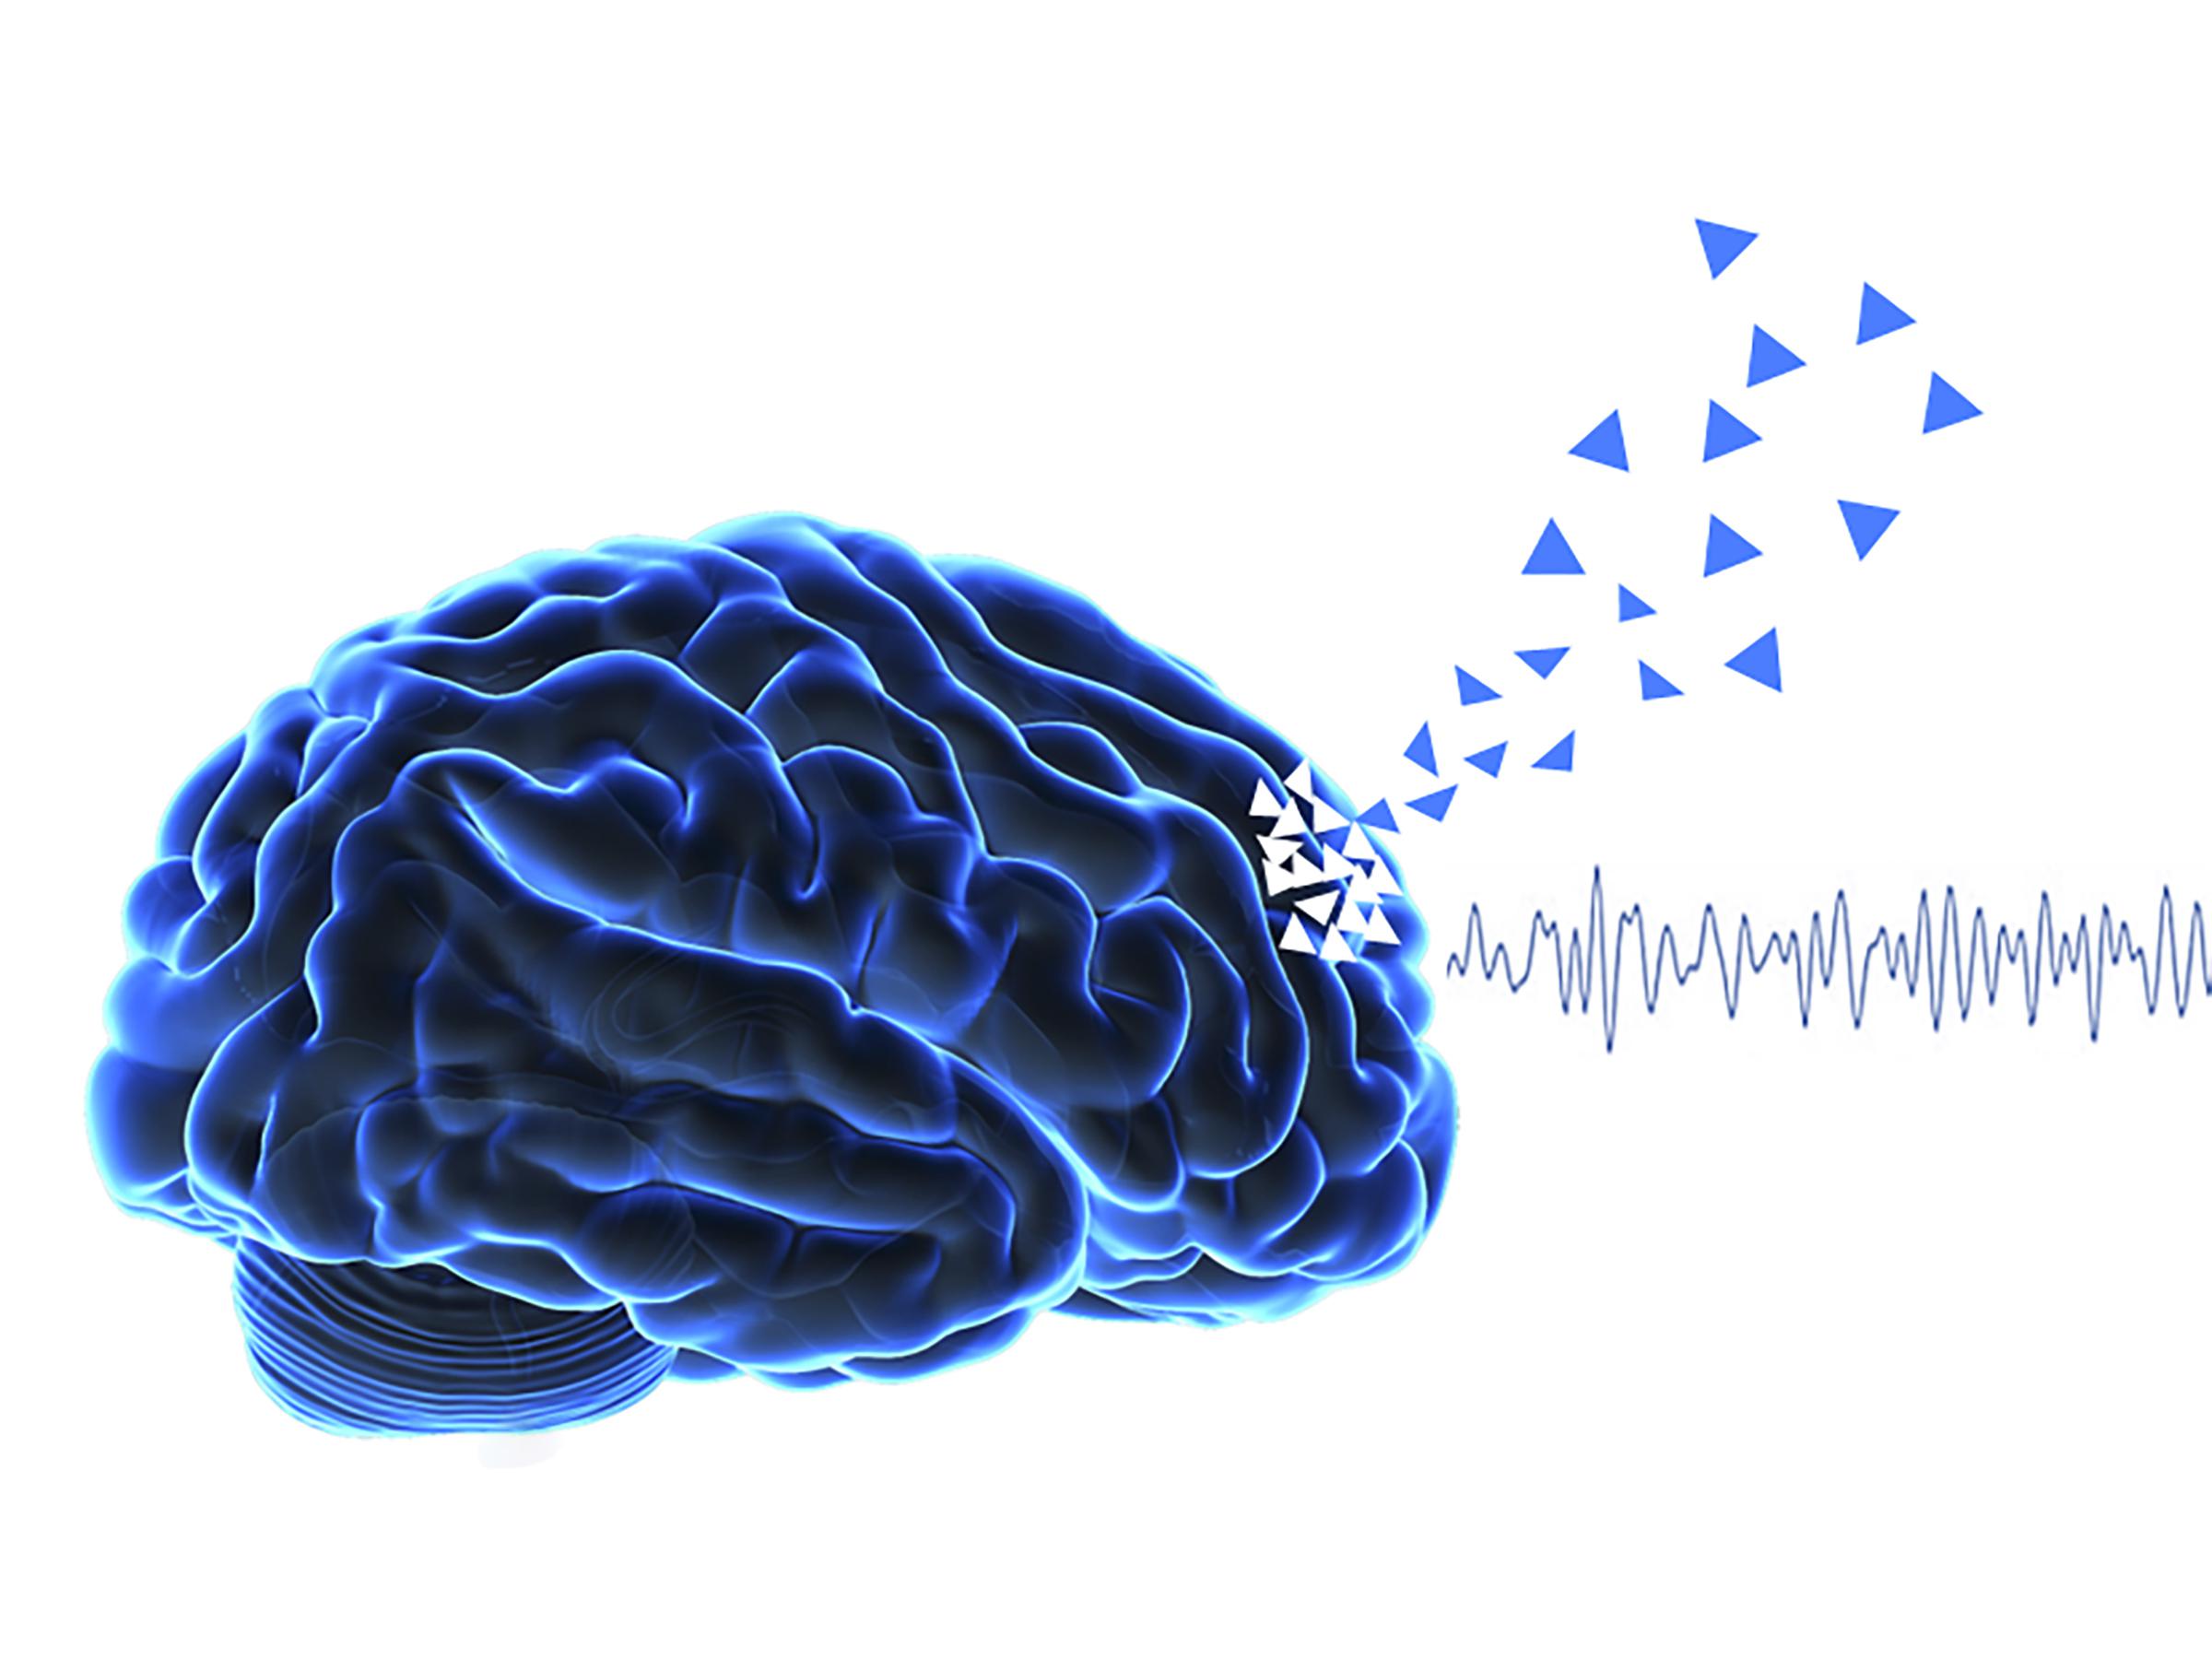 Early hallucinations in Parkinson's disease are associated with a rapid frontal cognitive decline (illustrated by the triangles), and is anticipated by a specific frontal neural oscillation (Theta frequency band).